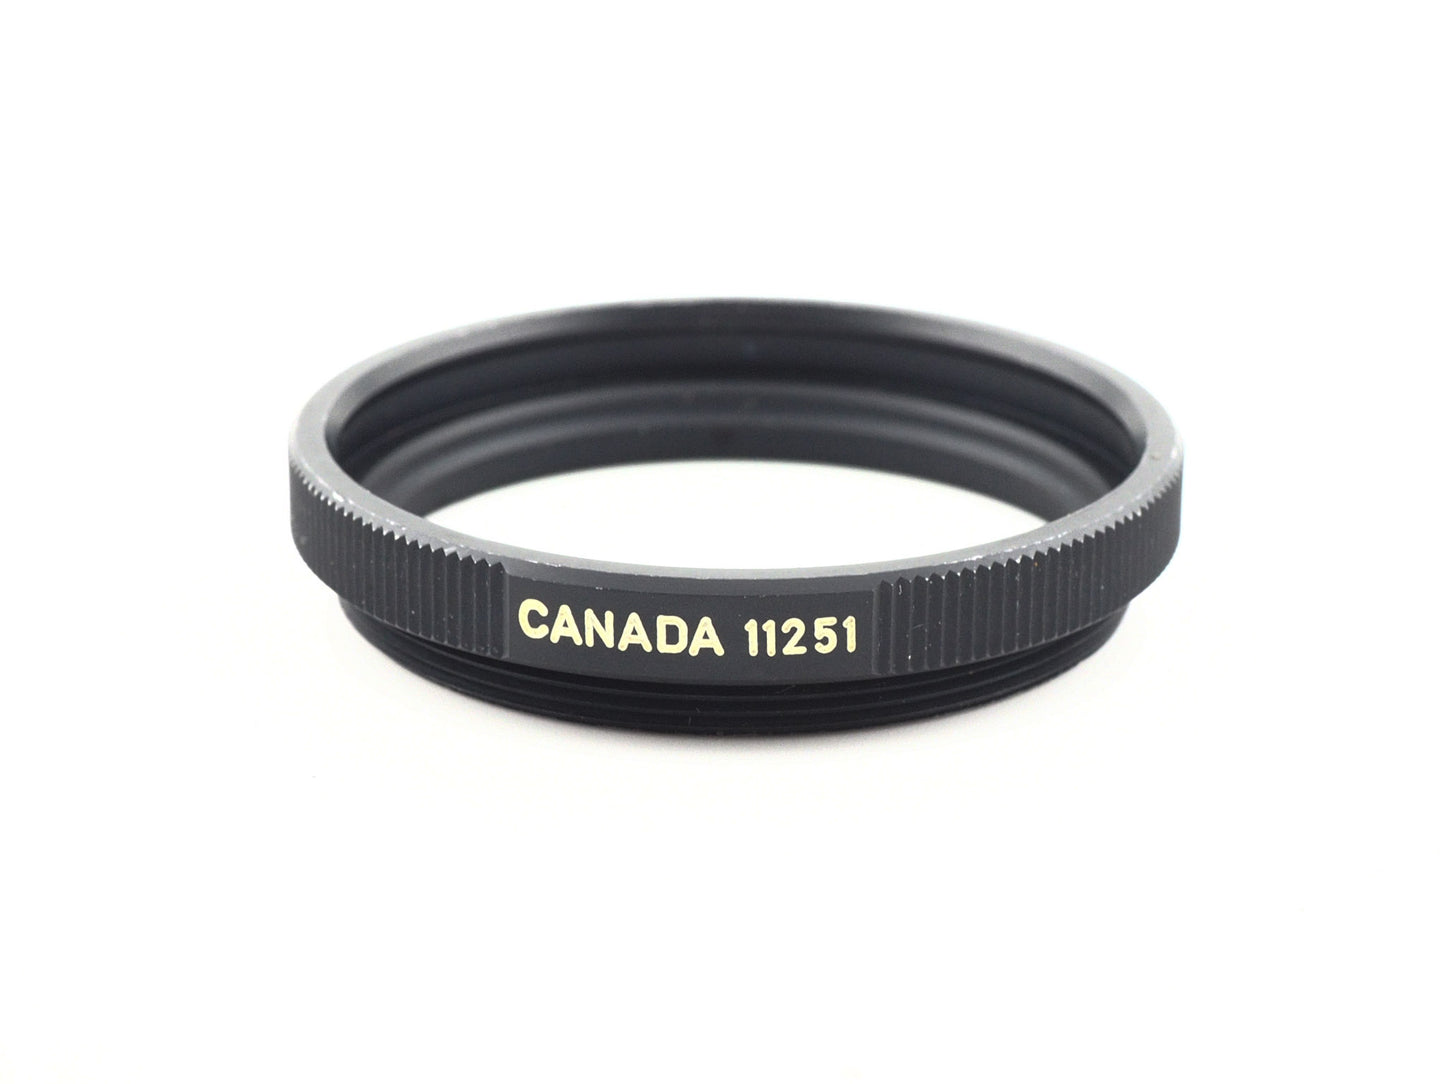 Leica Series 5.5 Lens Filter Adapter Retaining Ring 11251 - Accessory